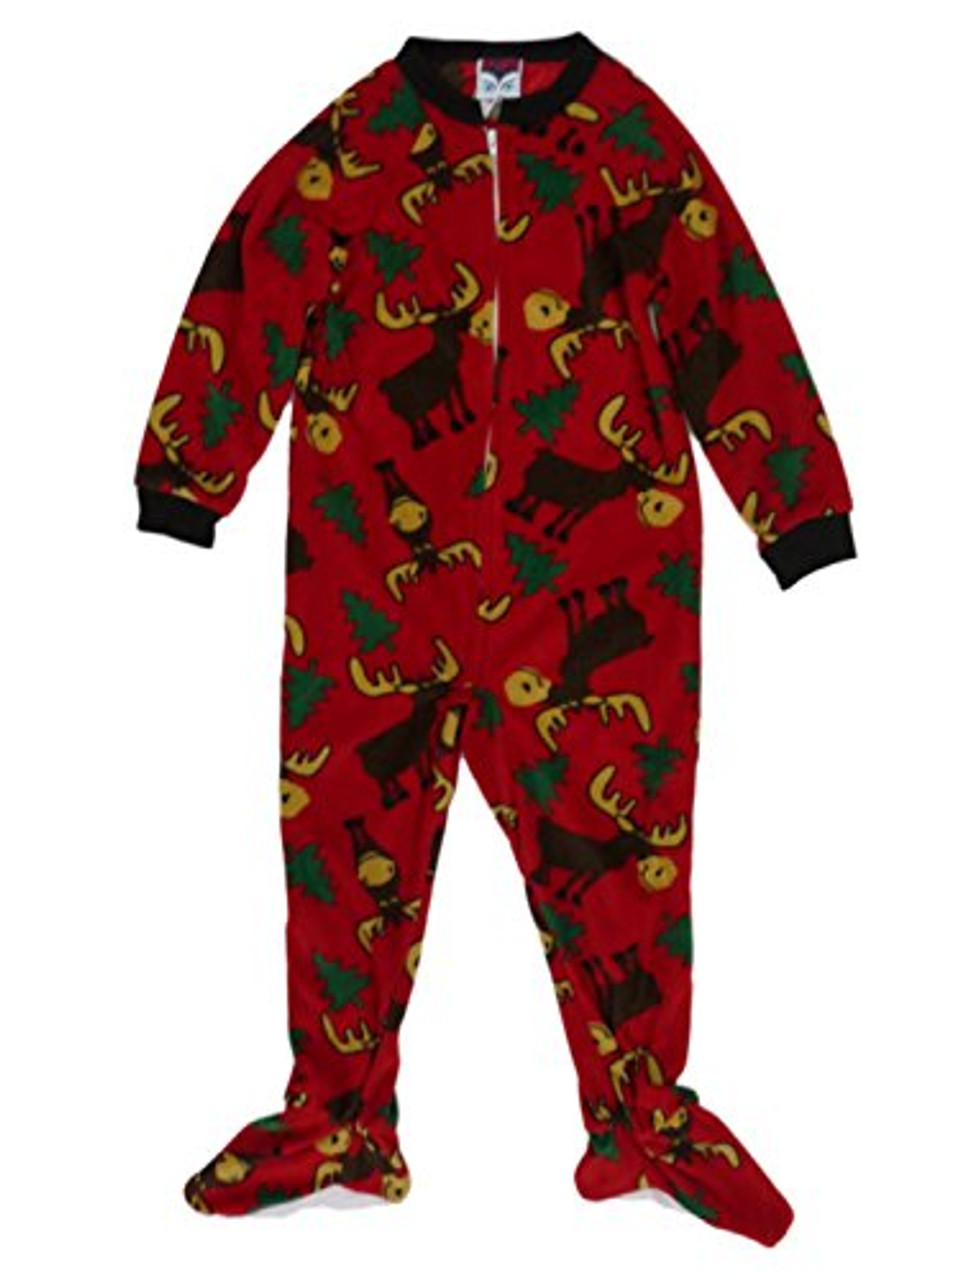 Up-Late Boys Red Fleece Moose Pajamas Footed Blanket Sleeper, Size 4 -  Little Dreamers Pajamas